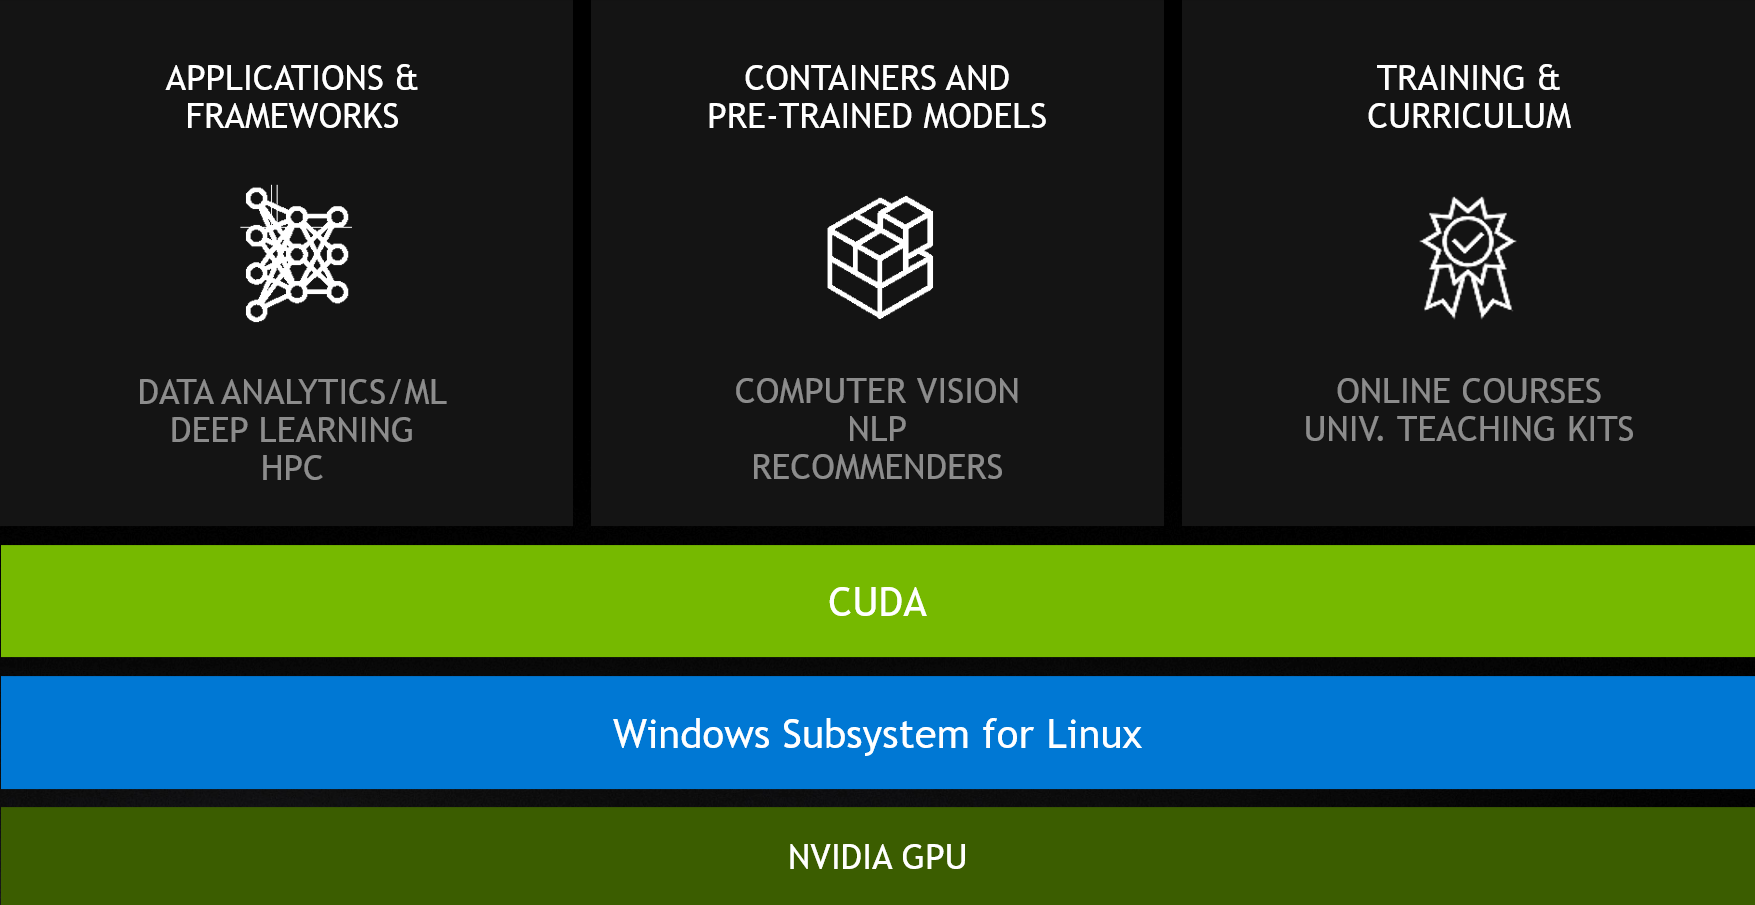 nvidia-gpu-windows-11-windows-subsystem-for-linux.png